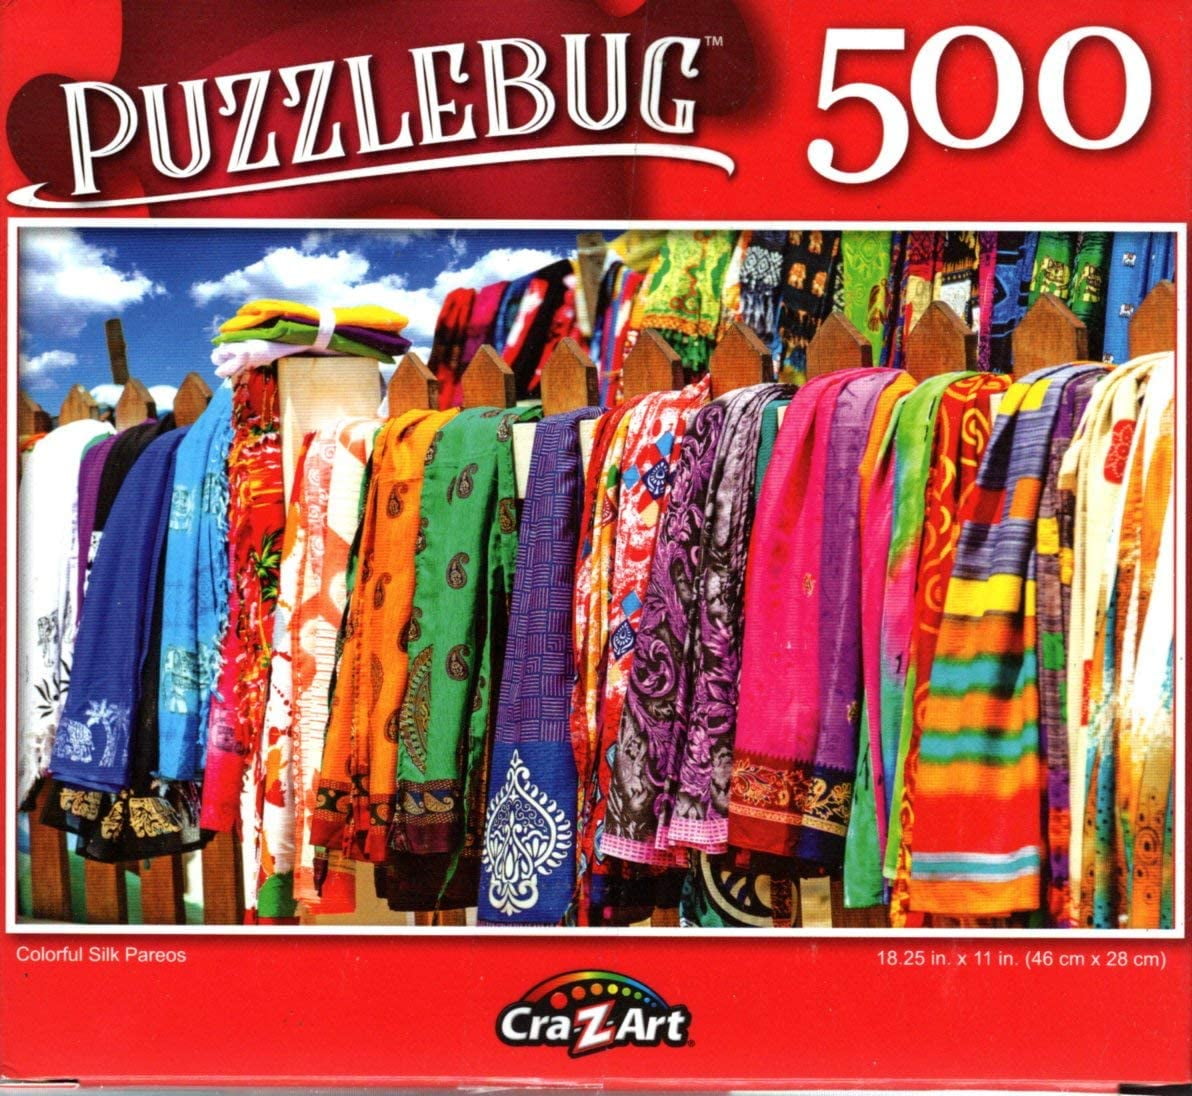 by Cra Z Art 500 Pieces Route 66 Museum MO Puzzle Bug